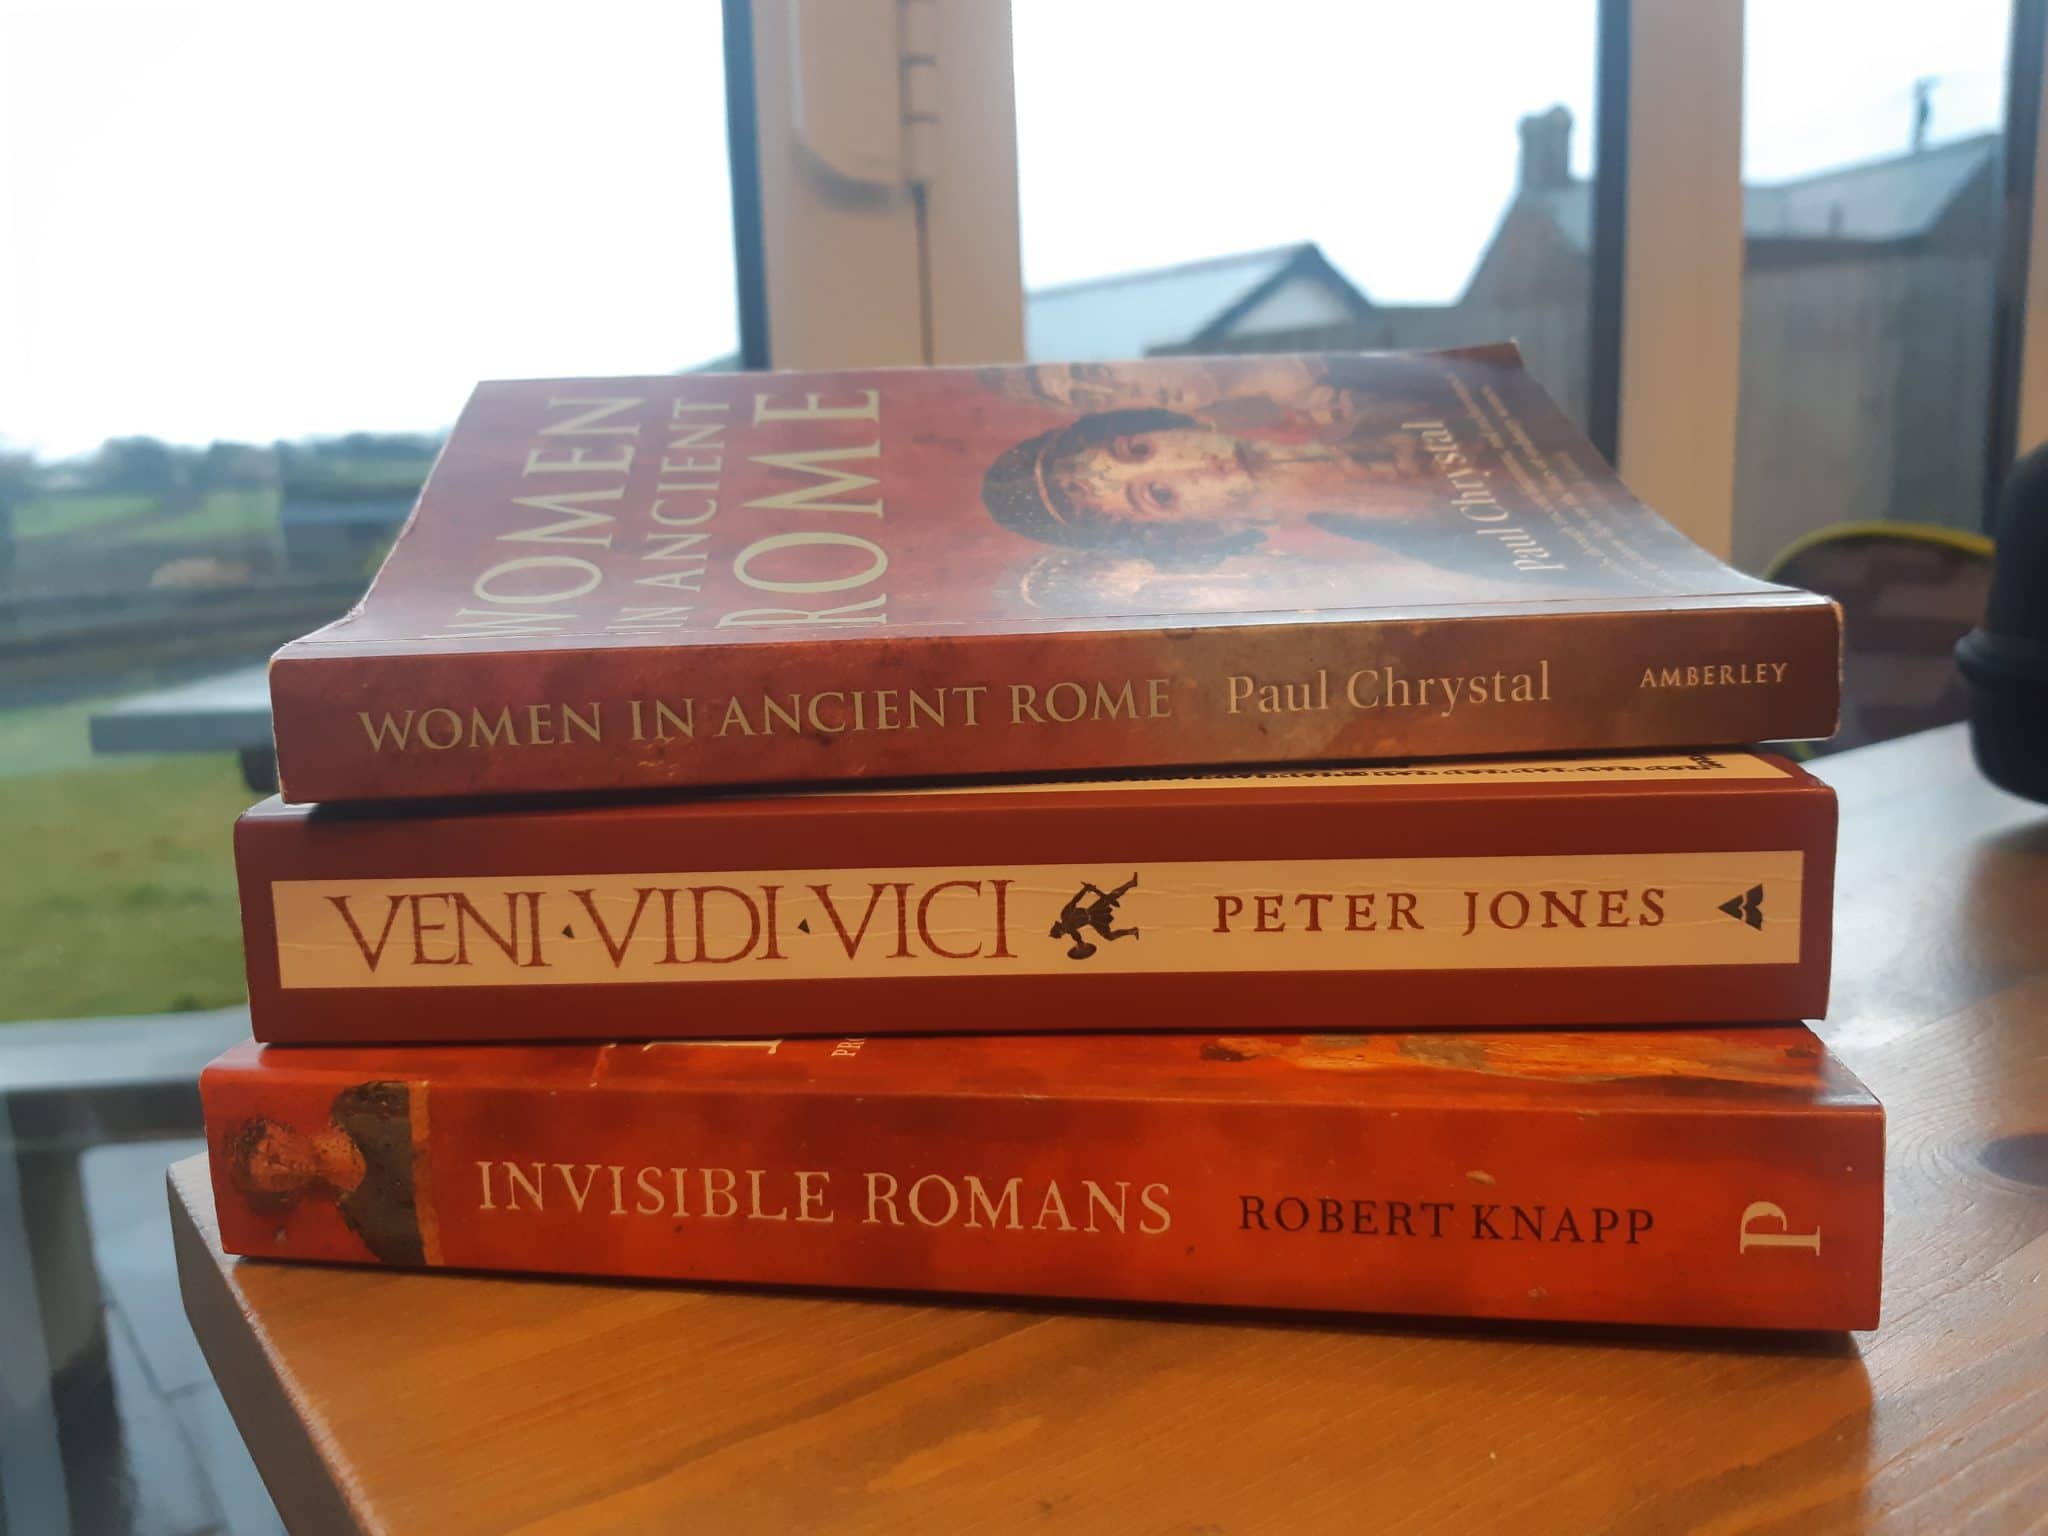 The Best Roman History Books: 9 Favorite Reads on Ancient Rome